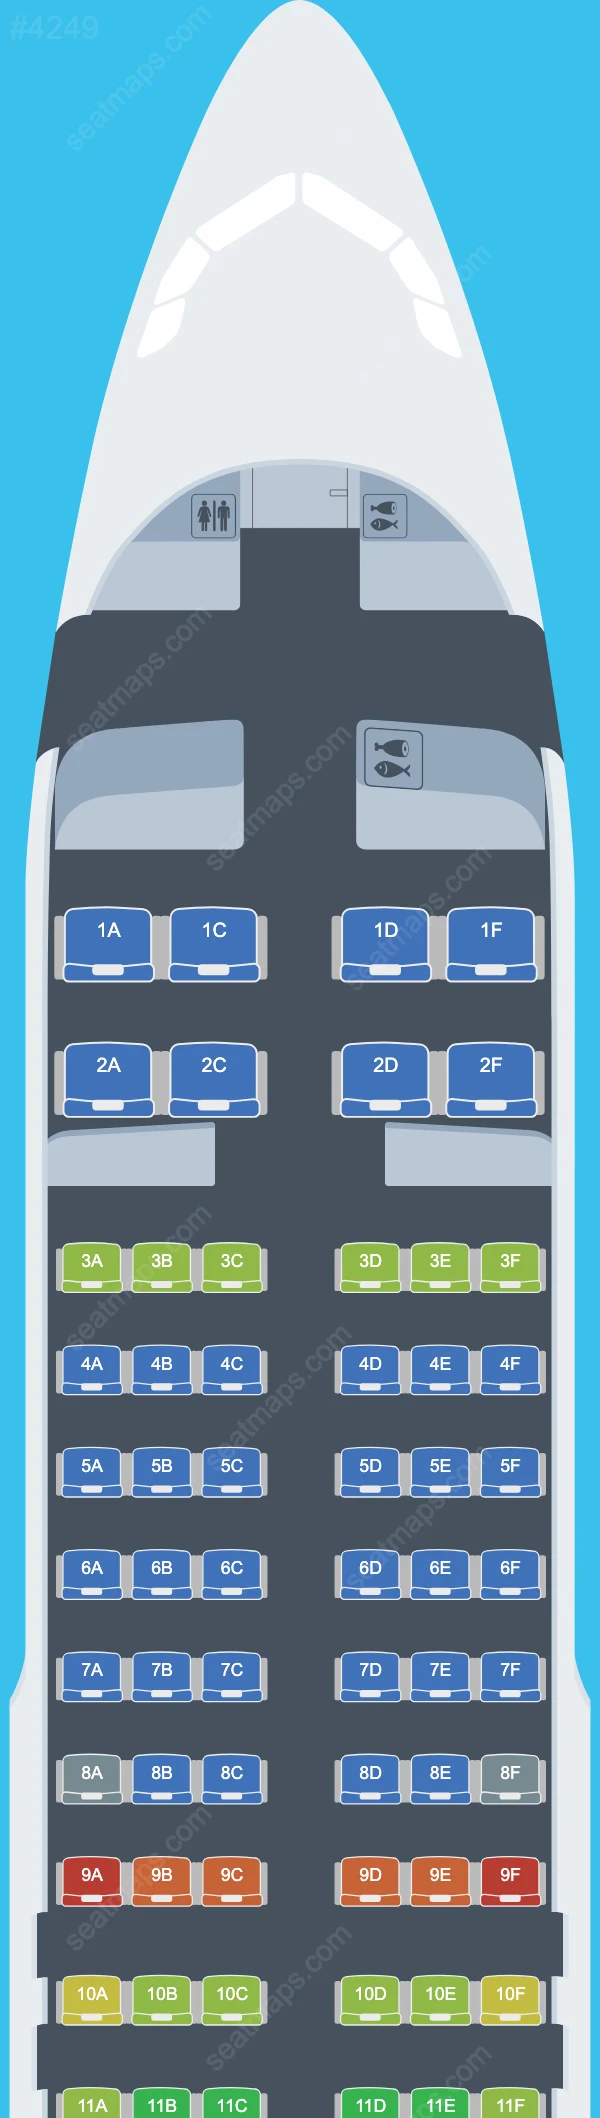 Shenzhen Airlines Airbus A320 Seat Maps A320-200